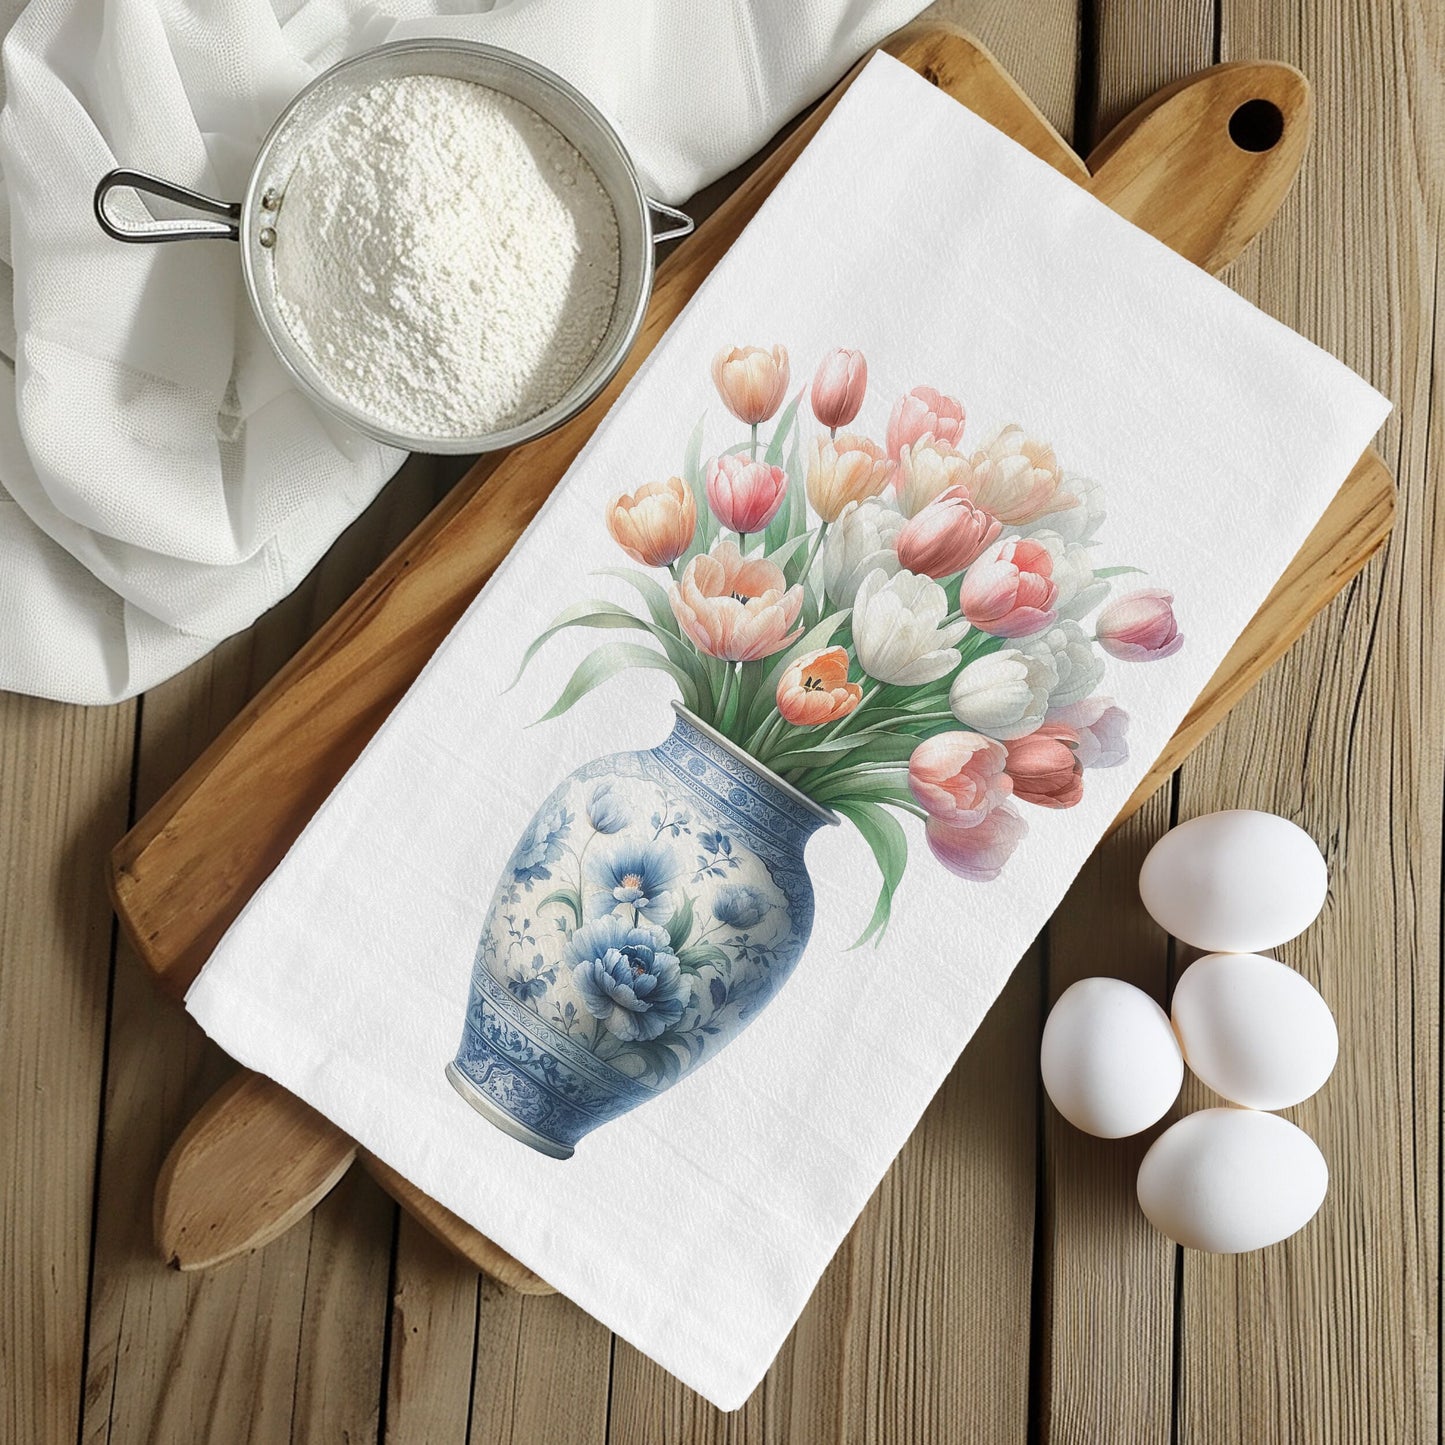 Chinoiserie Kitchen Towel with Blue and White Floral Design: Tulips in an Elegant Vase, Kitchen Decor with Flowers - Cotton Flour Sack Towel